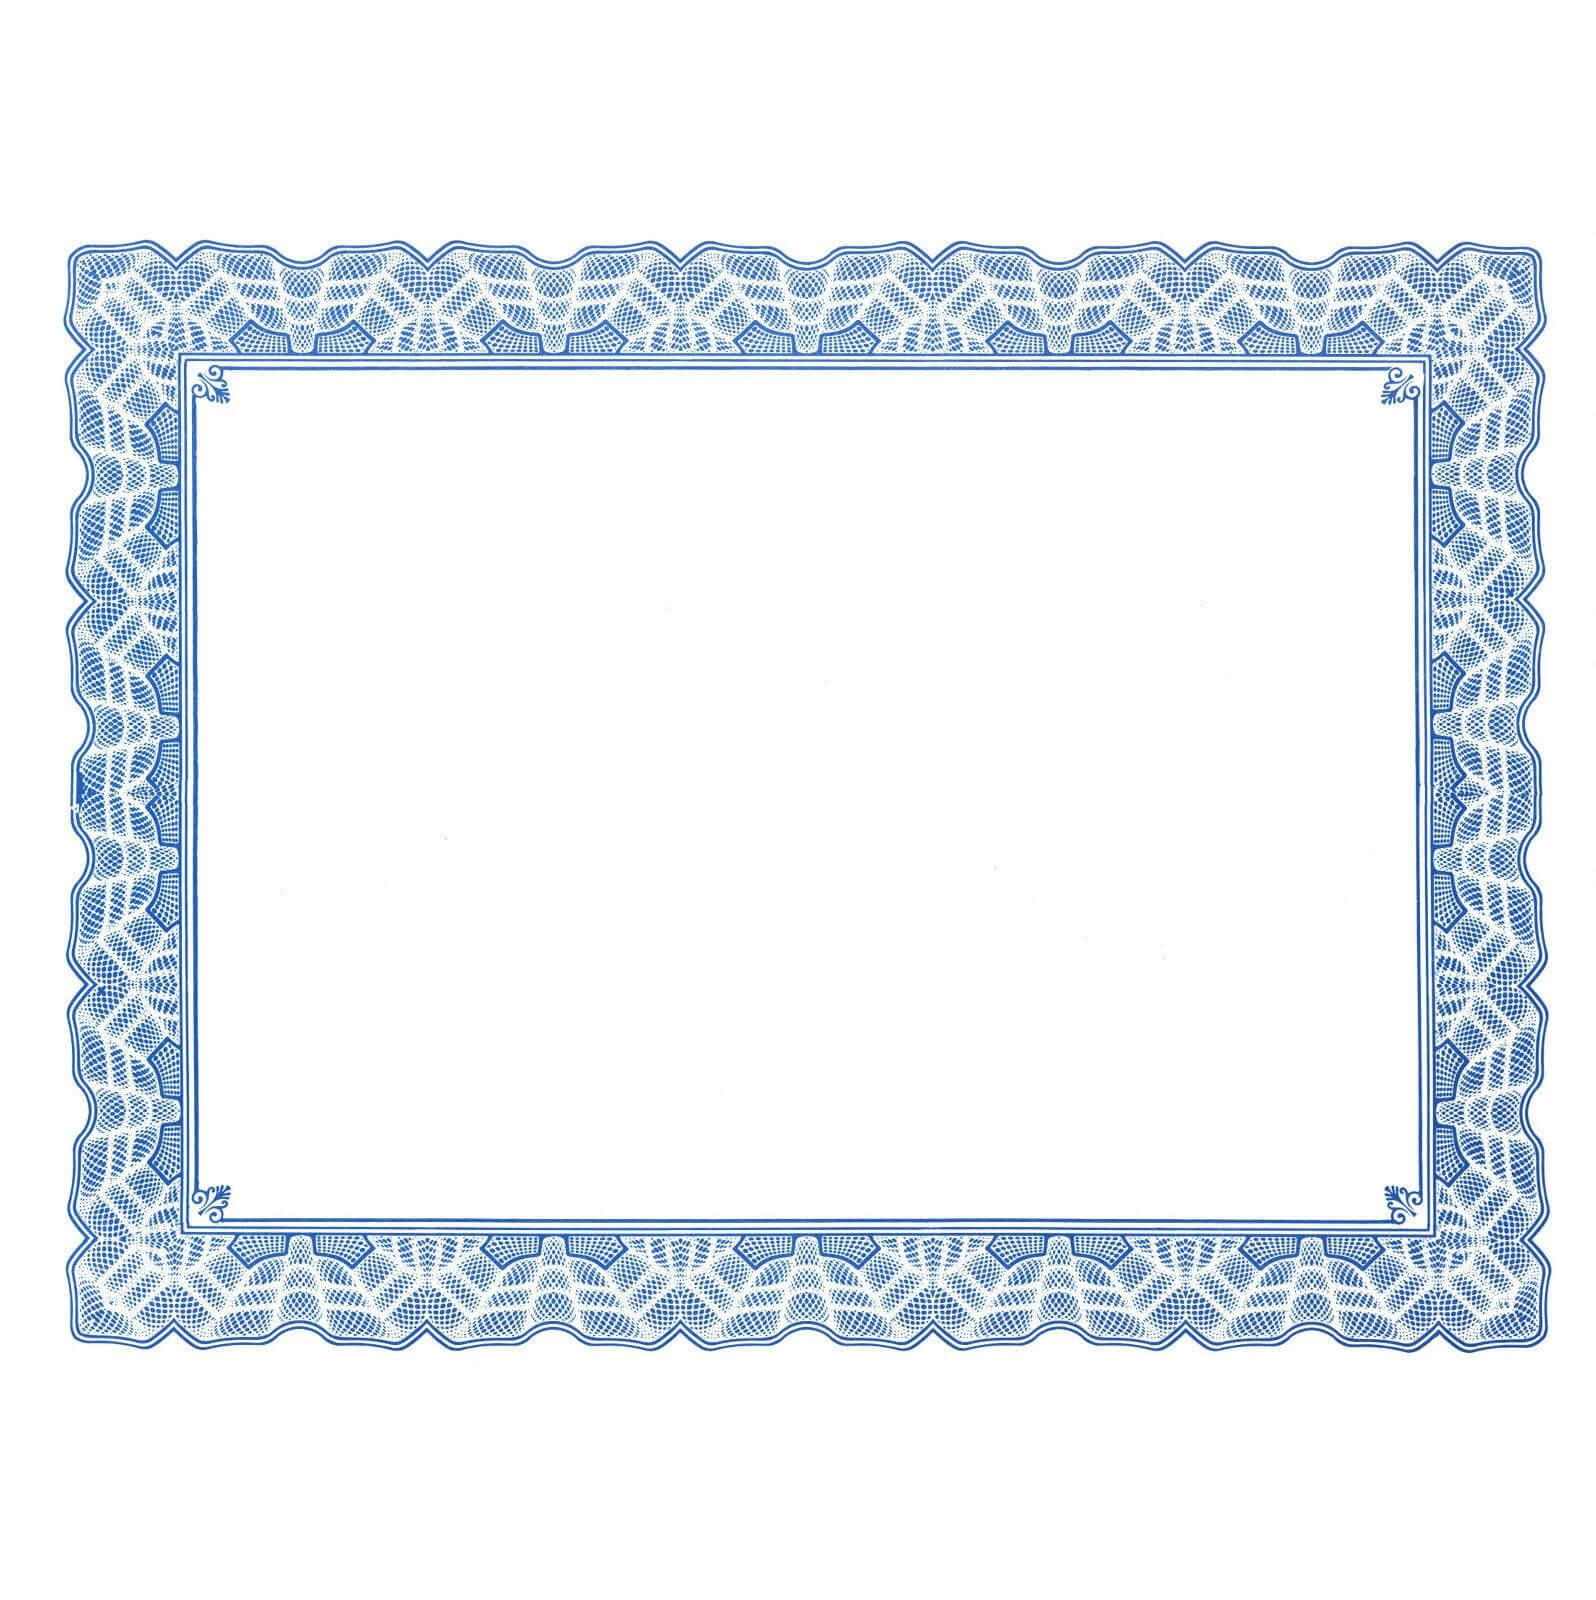 Free Certificate Border Templates For Word Within Free Certificate Templates For Word 2007